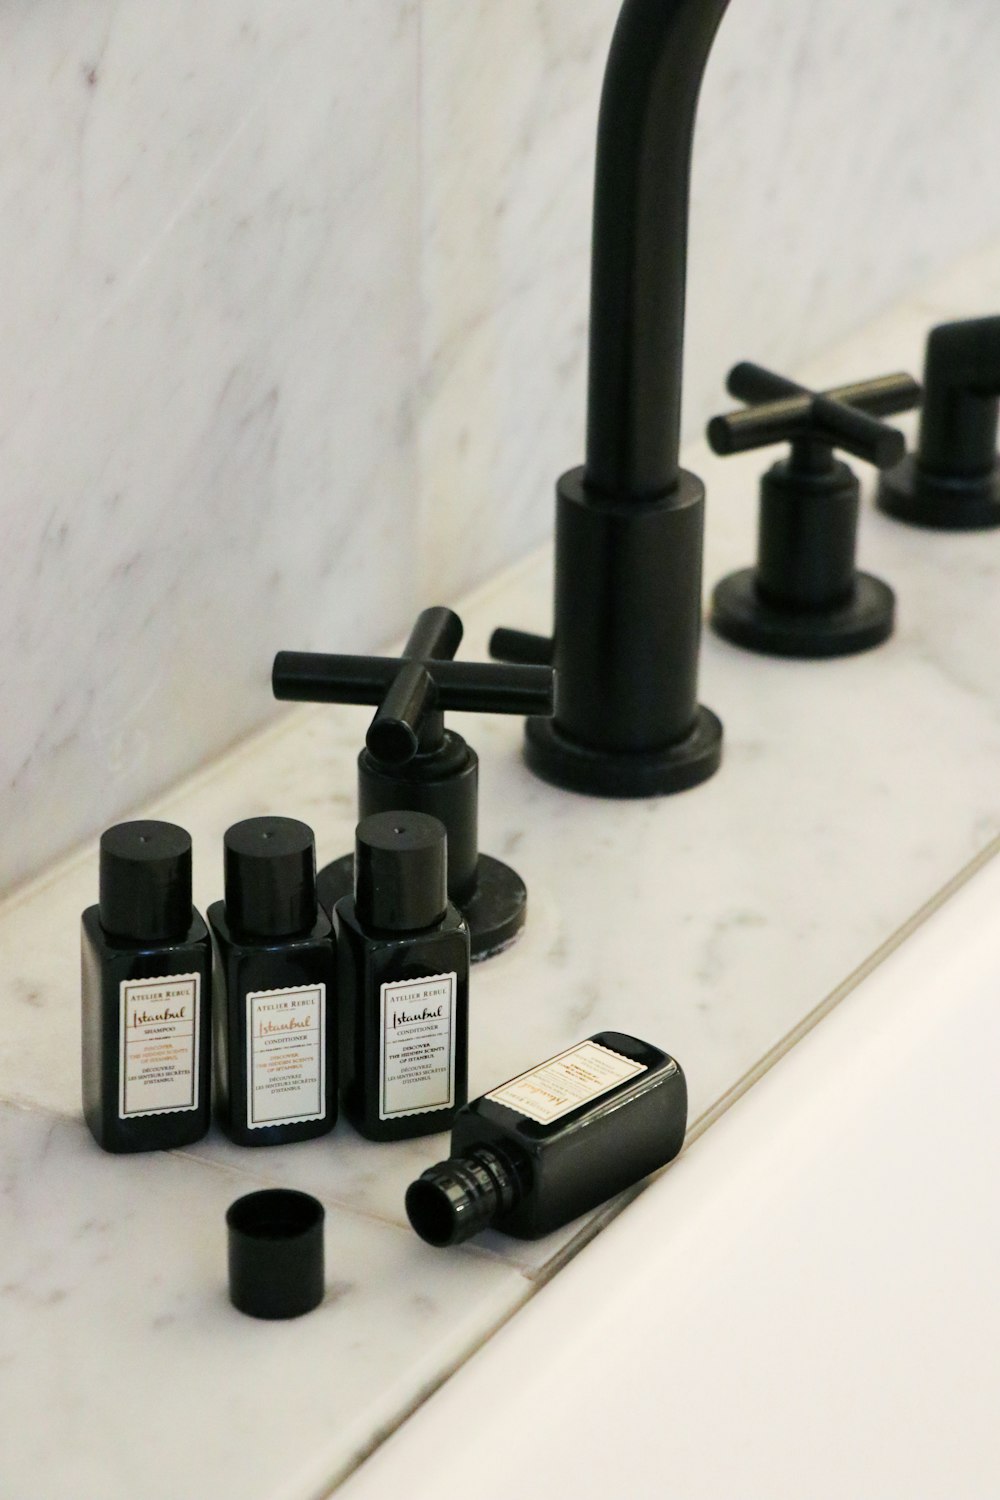 a black faucet and soap bottles on a sink